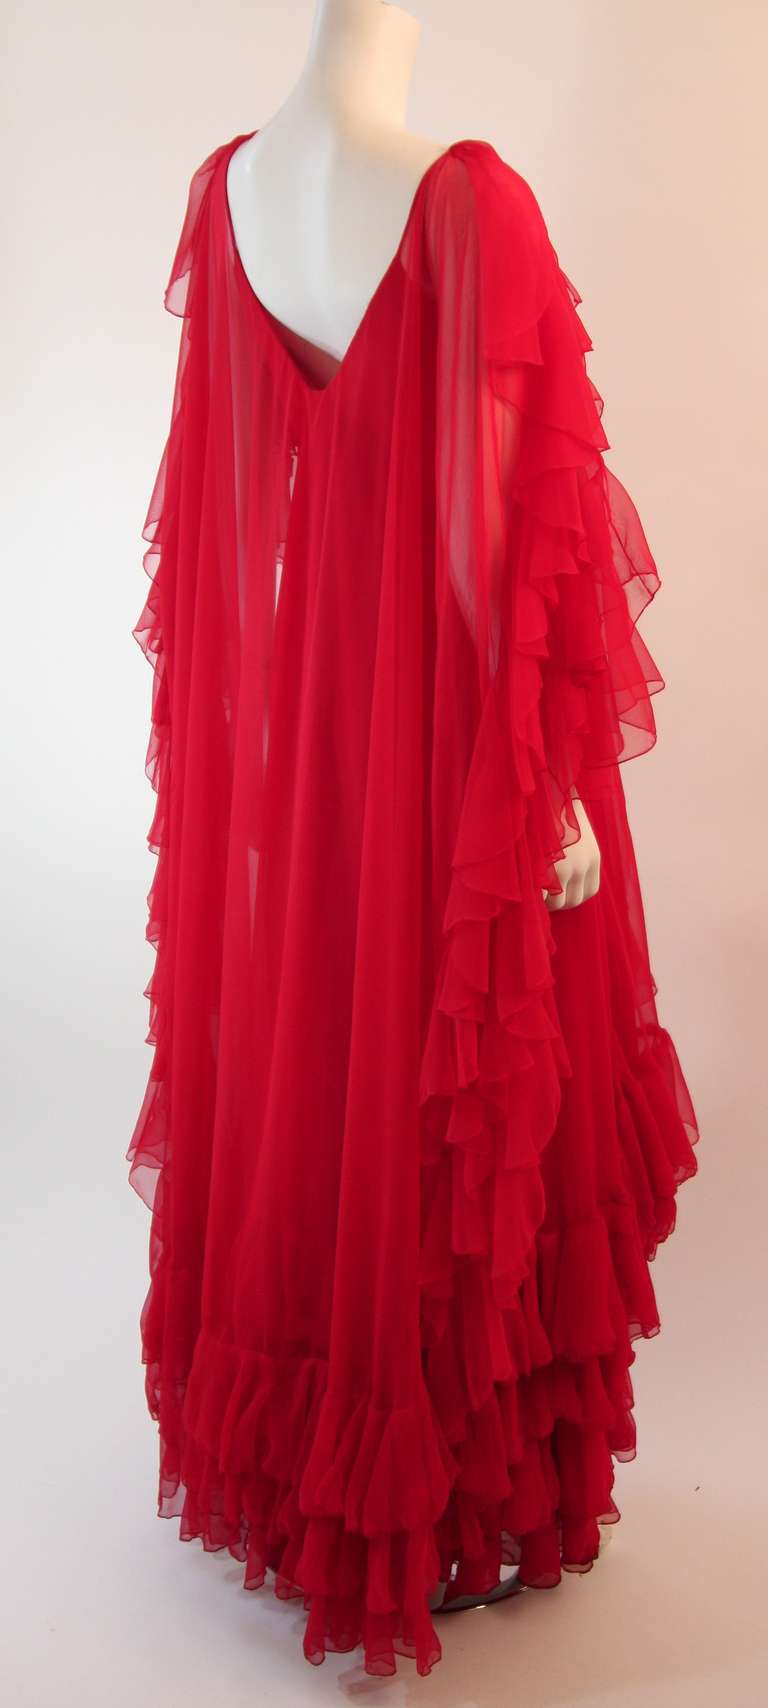 Ruben Panis Red Chiffon Ruffle Gown Property of Magda Gabor, sister of Zsa Zsa In Good Condition For Sale In Los Angeles, CA